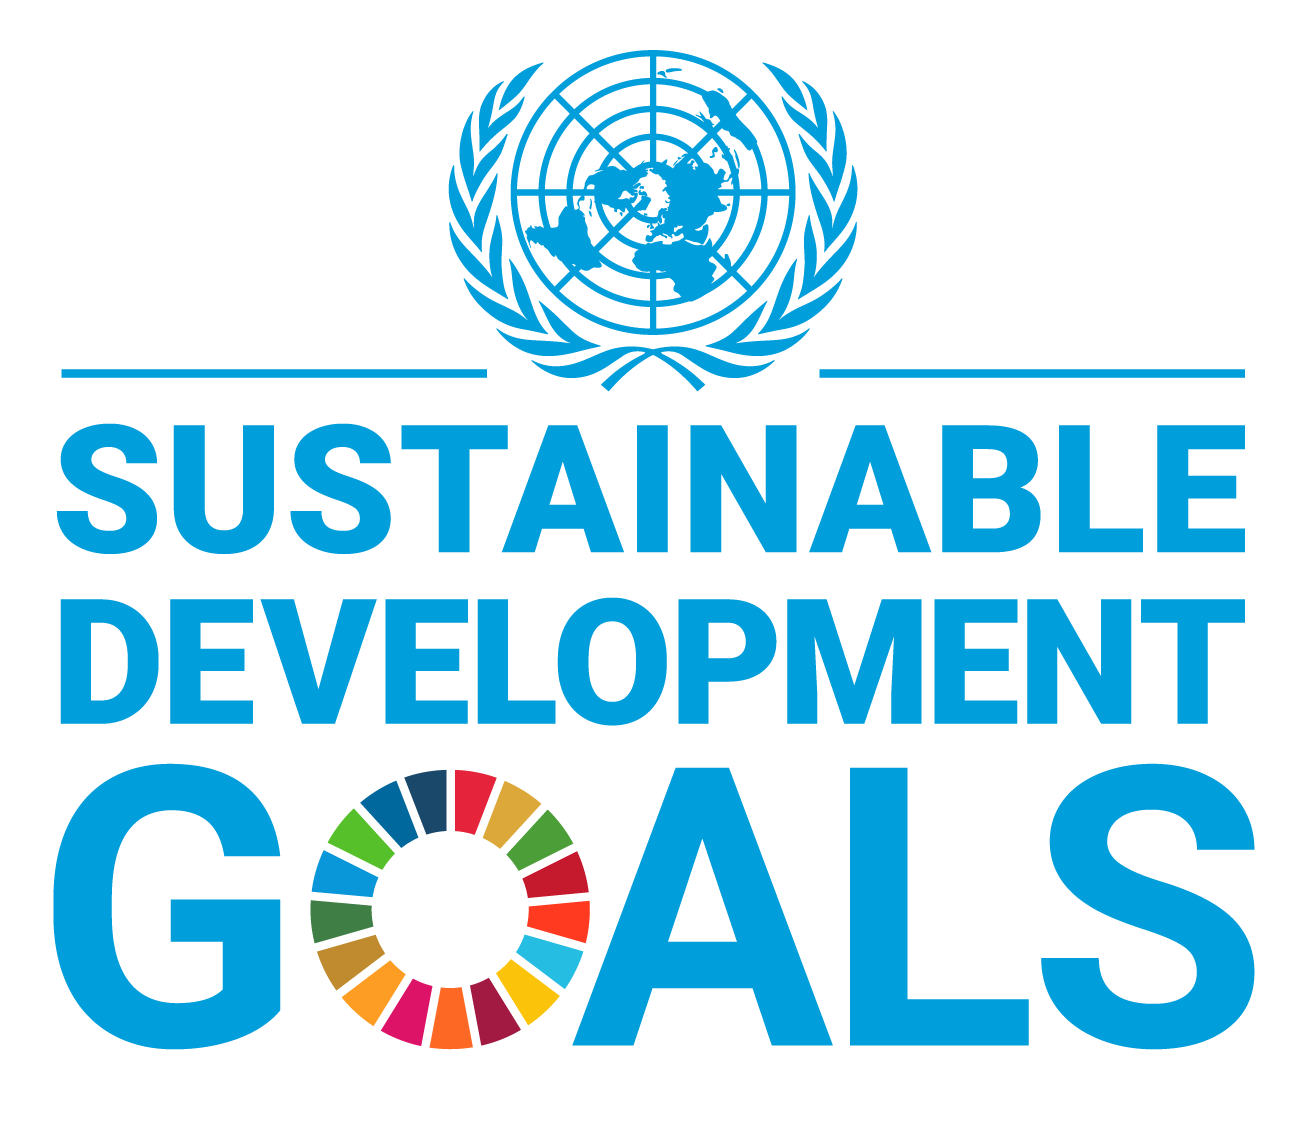 Sustainable Development Goals by the United nations